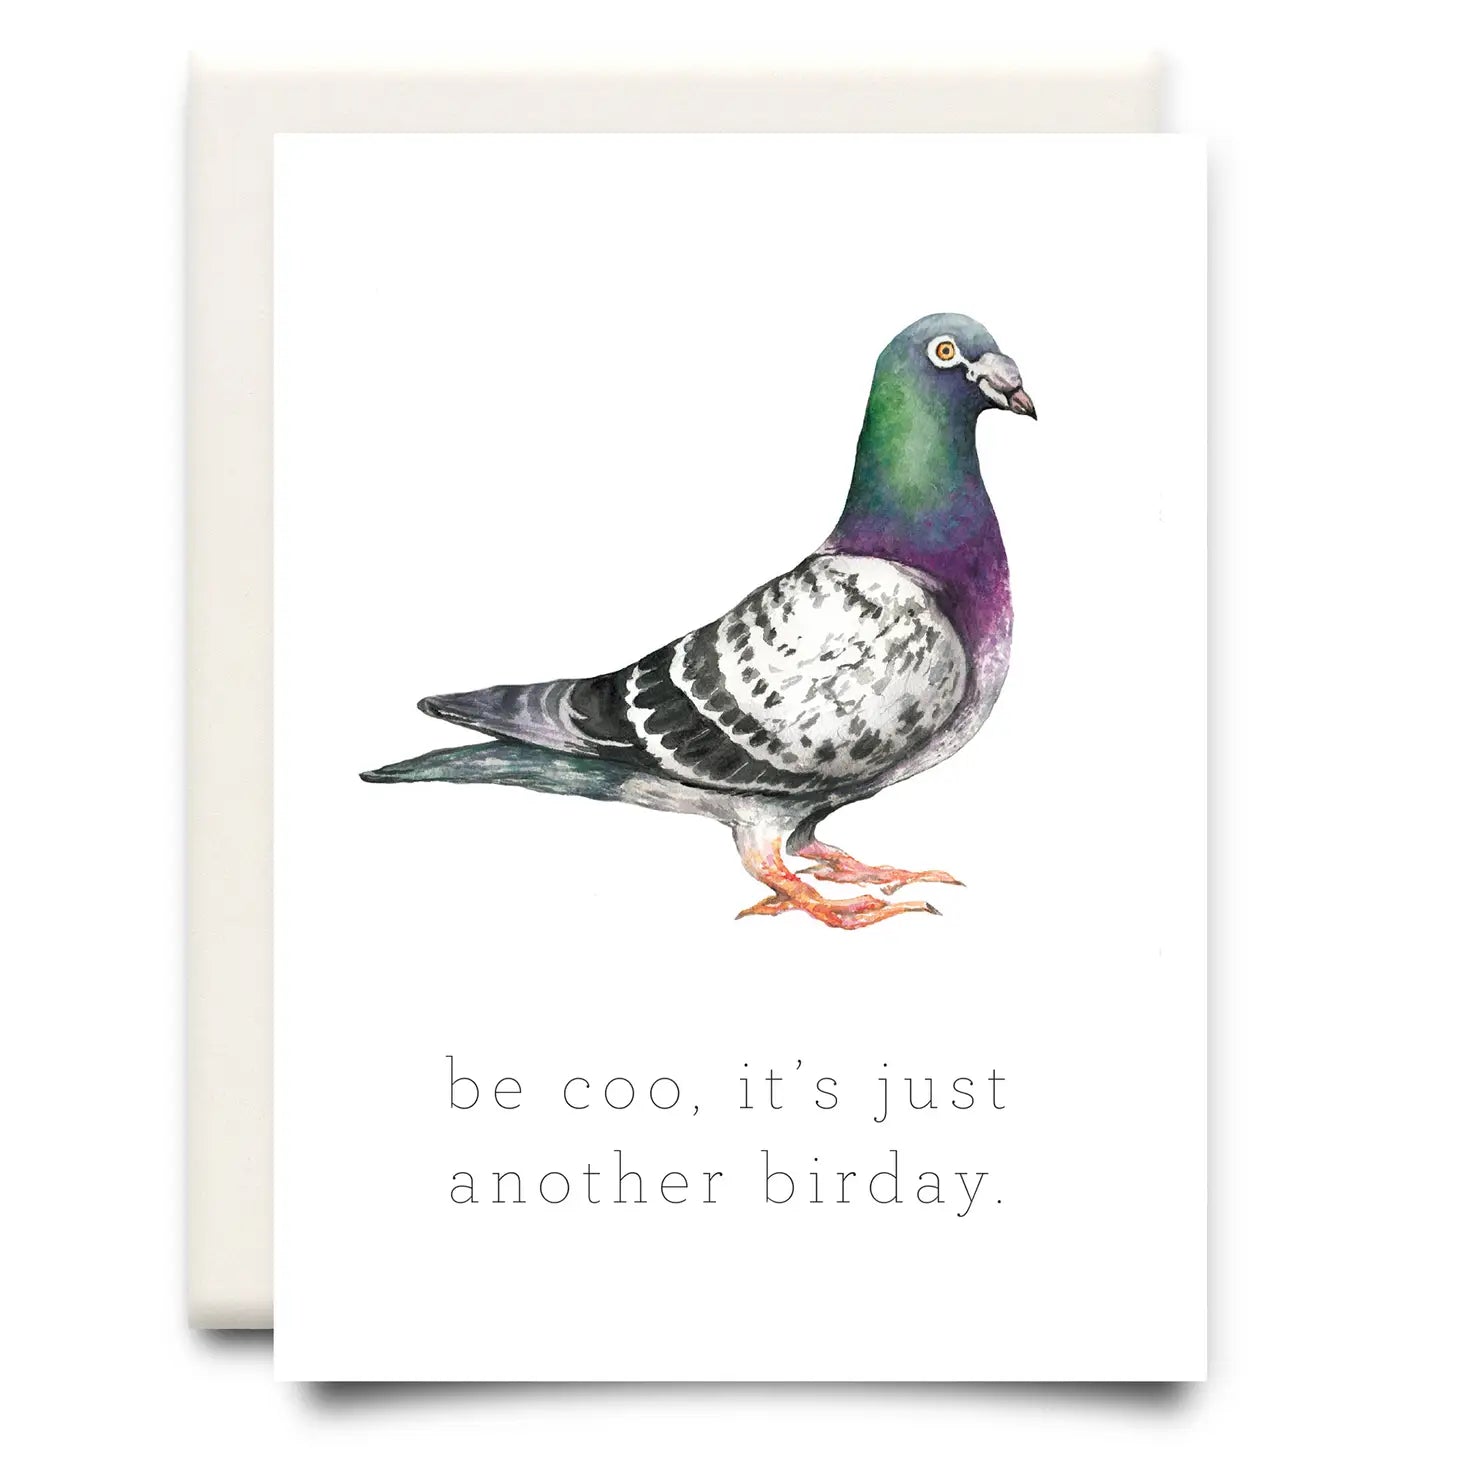 Inkwell Cards “Be Coo!” Card